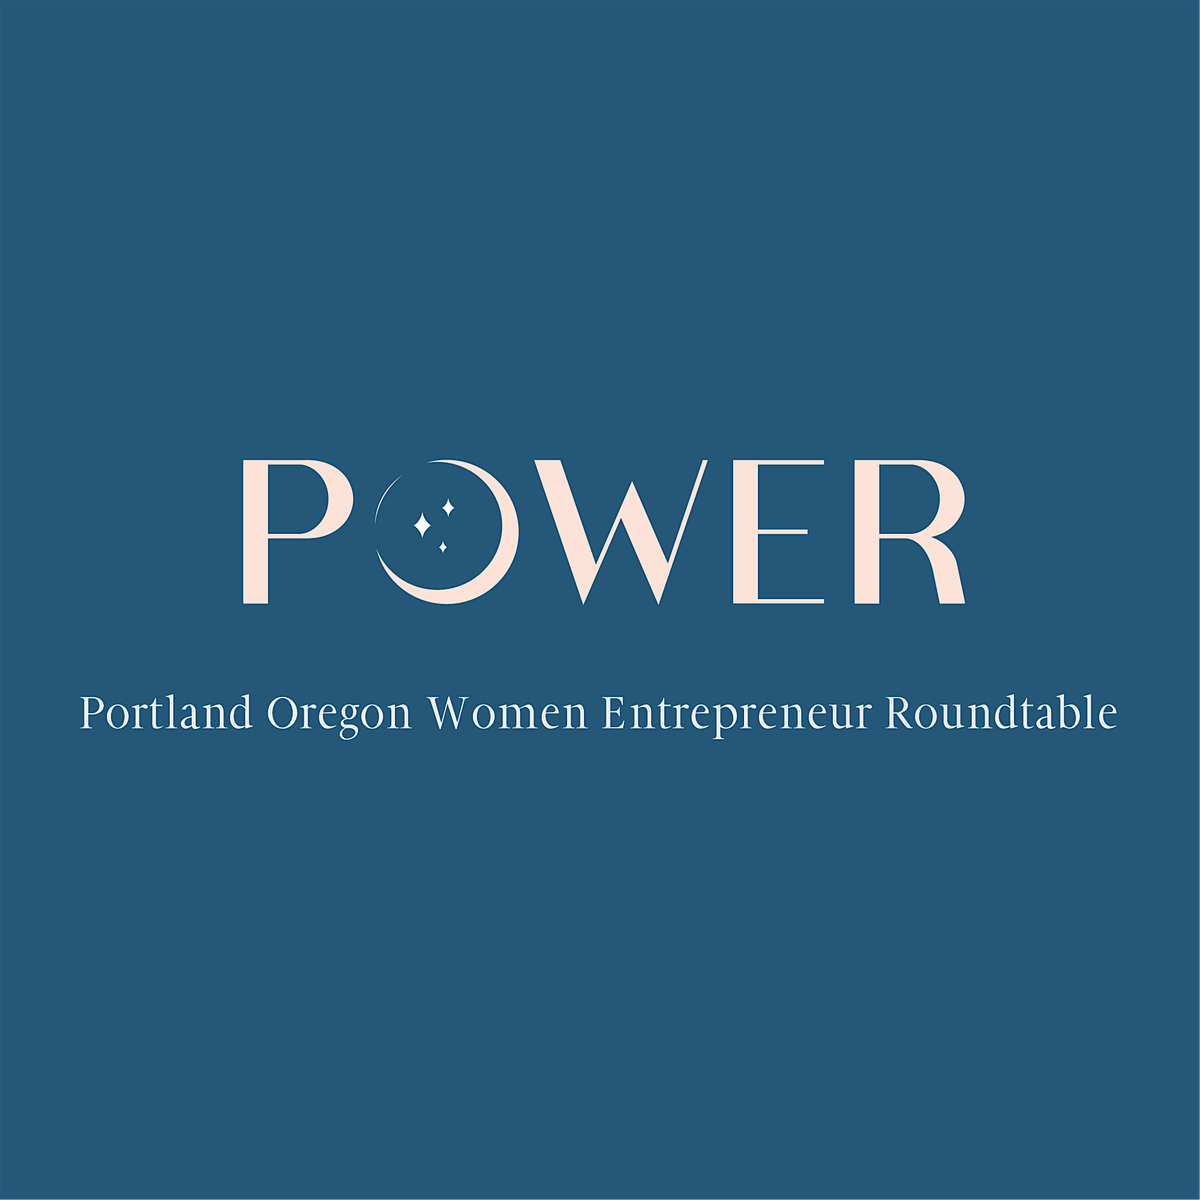 In-Person POWER Women's Networking!